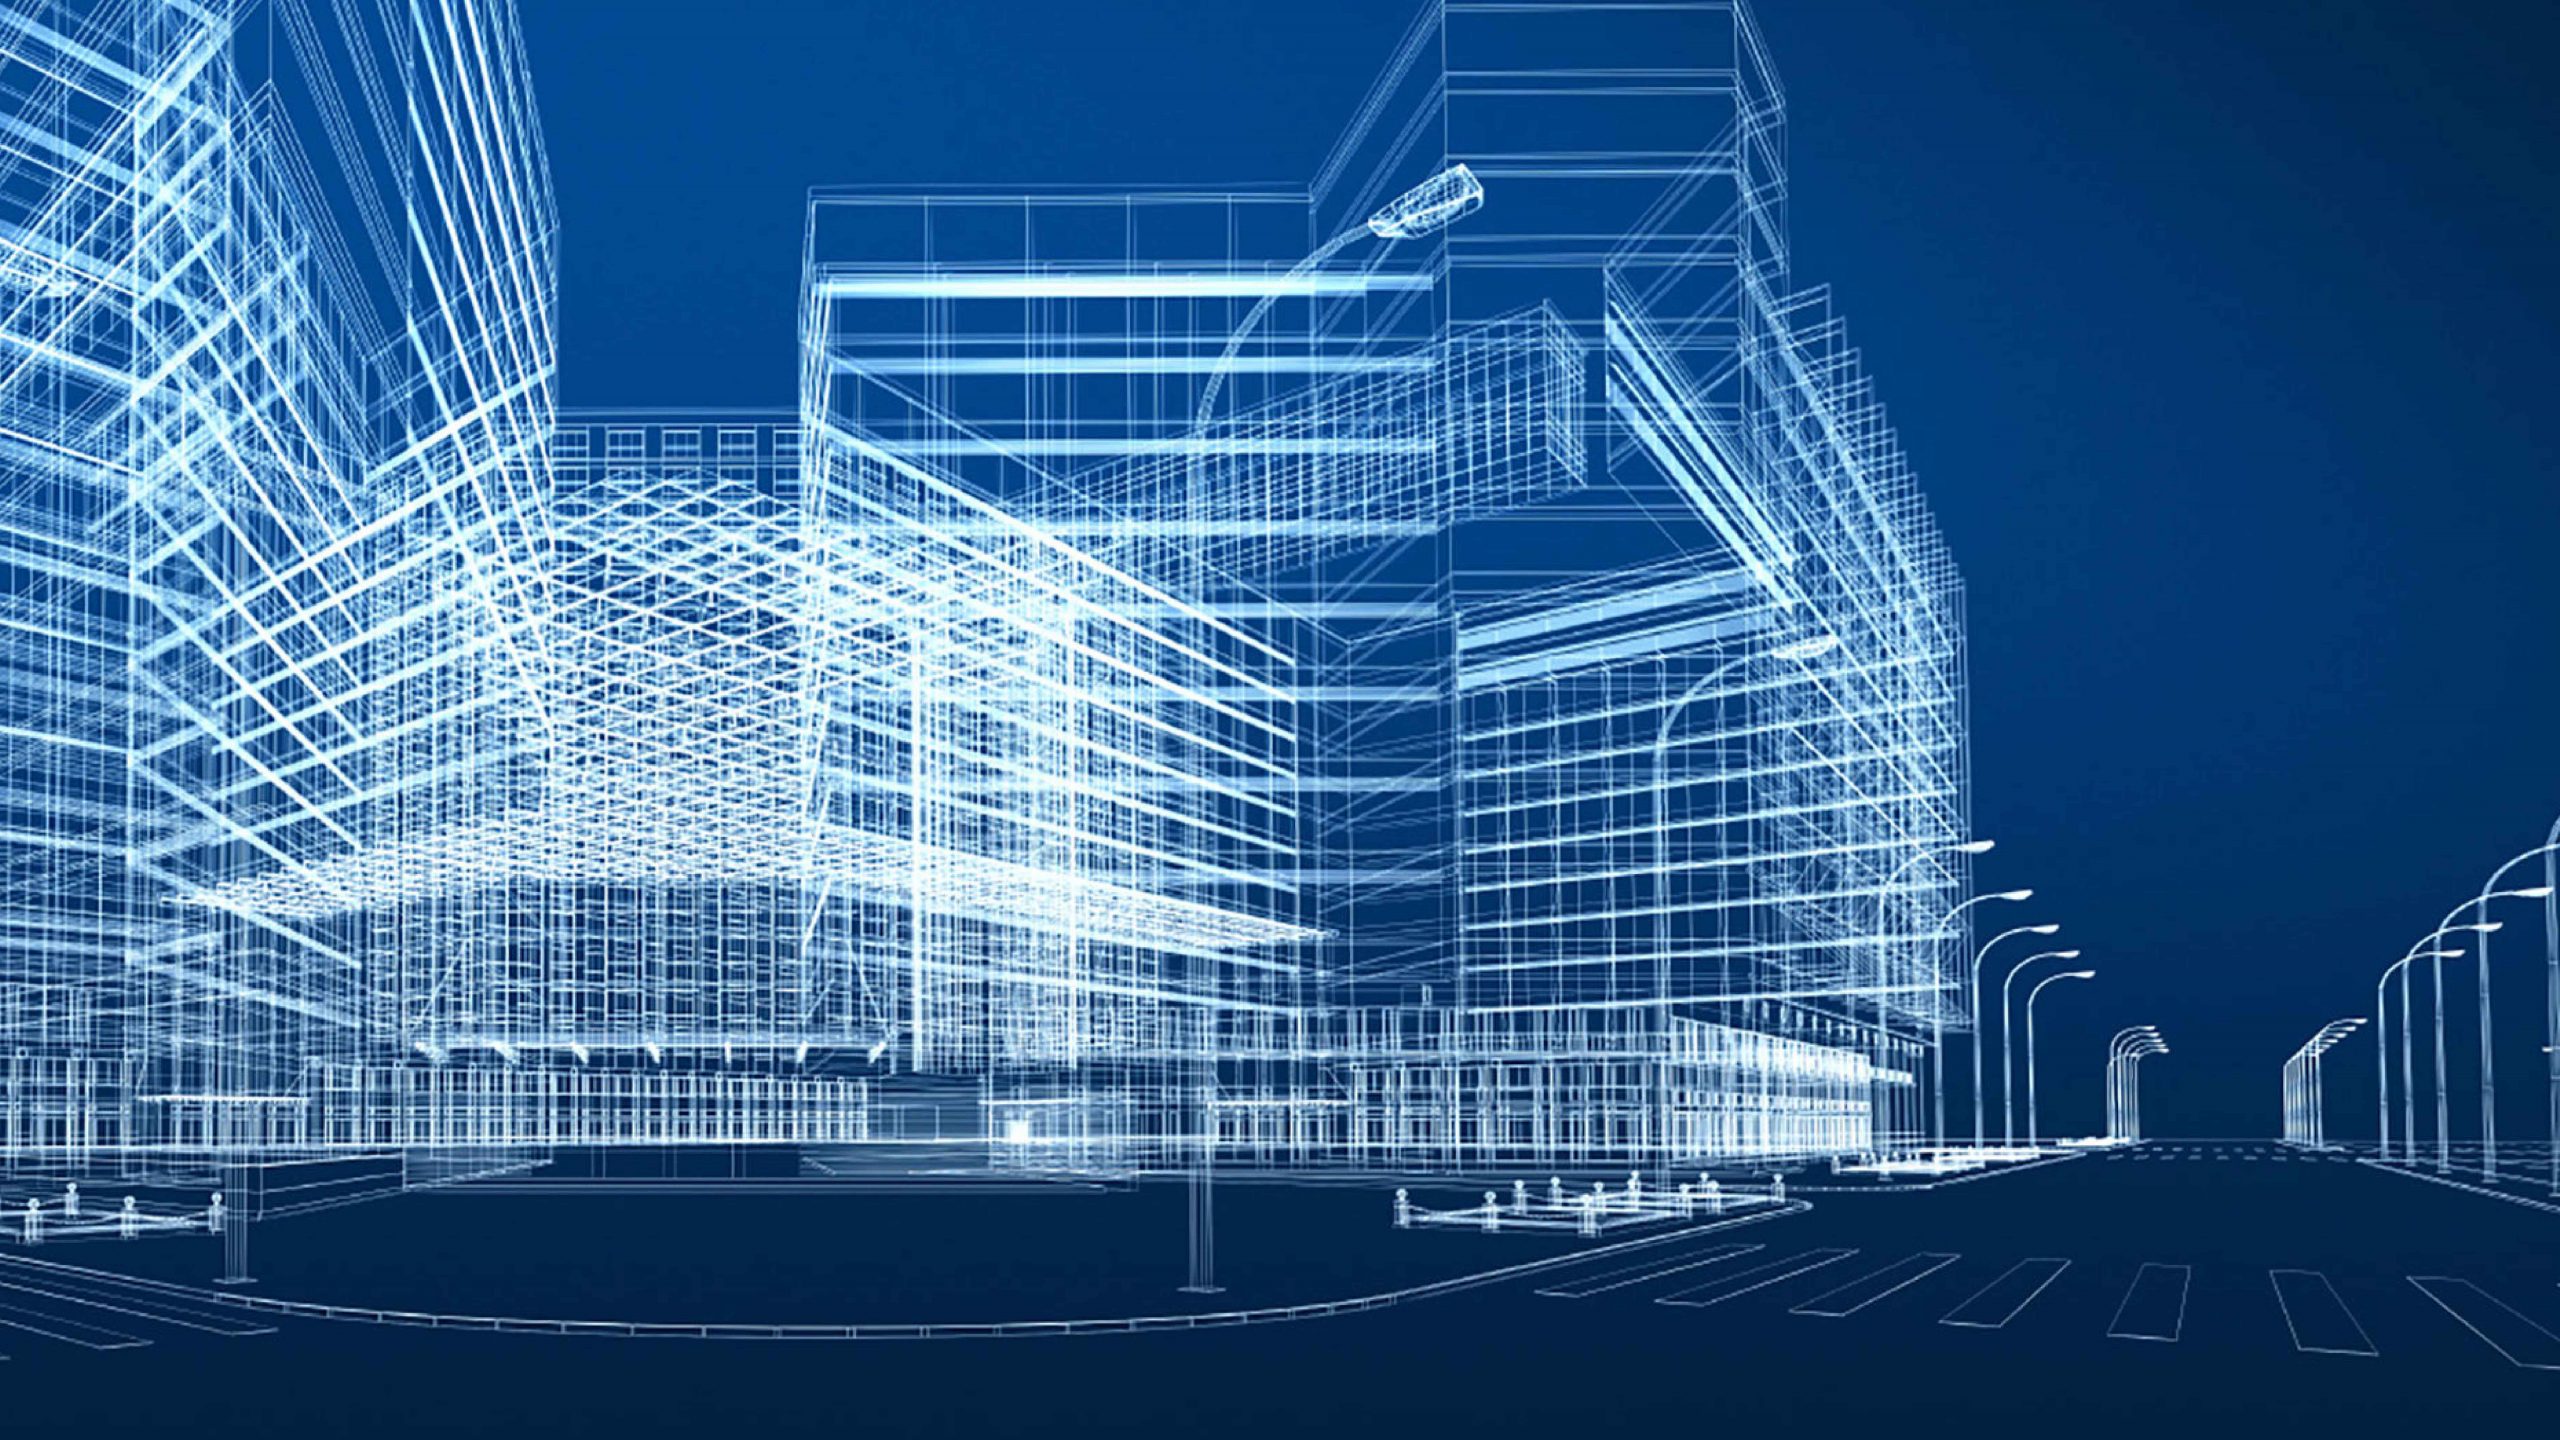 Advanced in Building Information Modeling